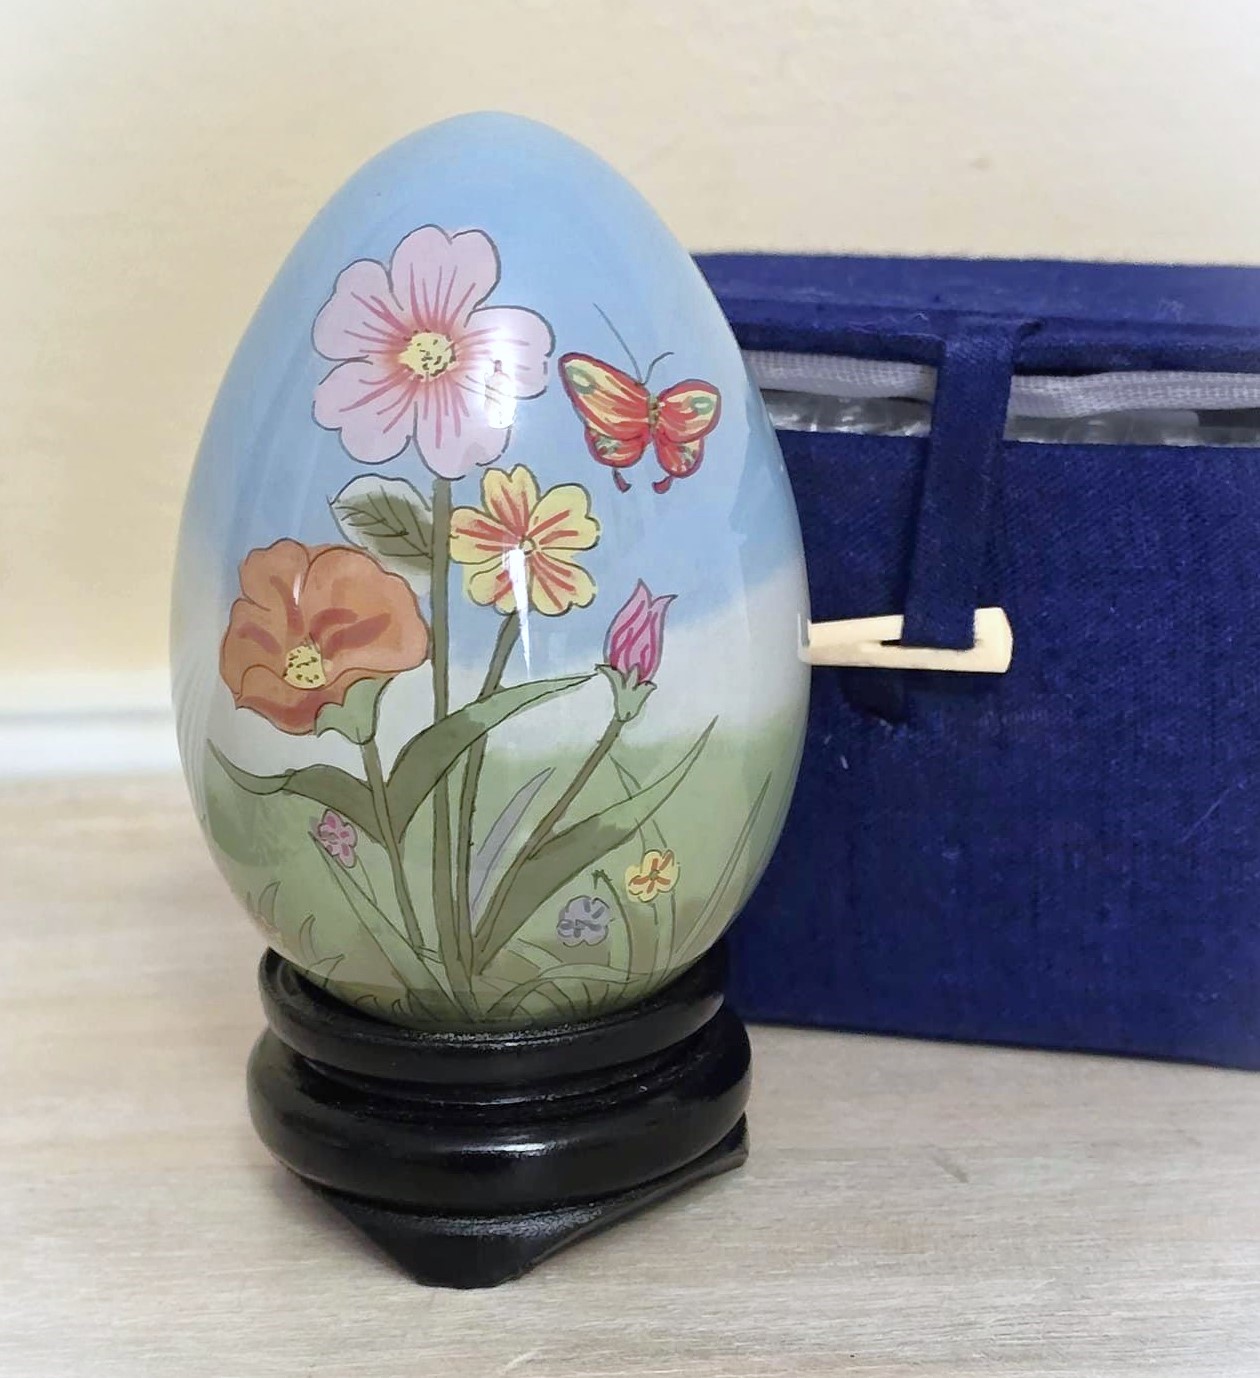 Vintage egg and stand, with original linen box, decorative egg, easter display, butterflies and flowers